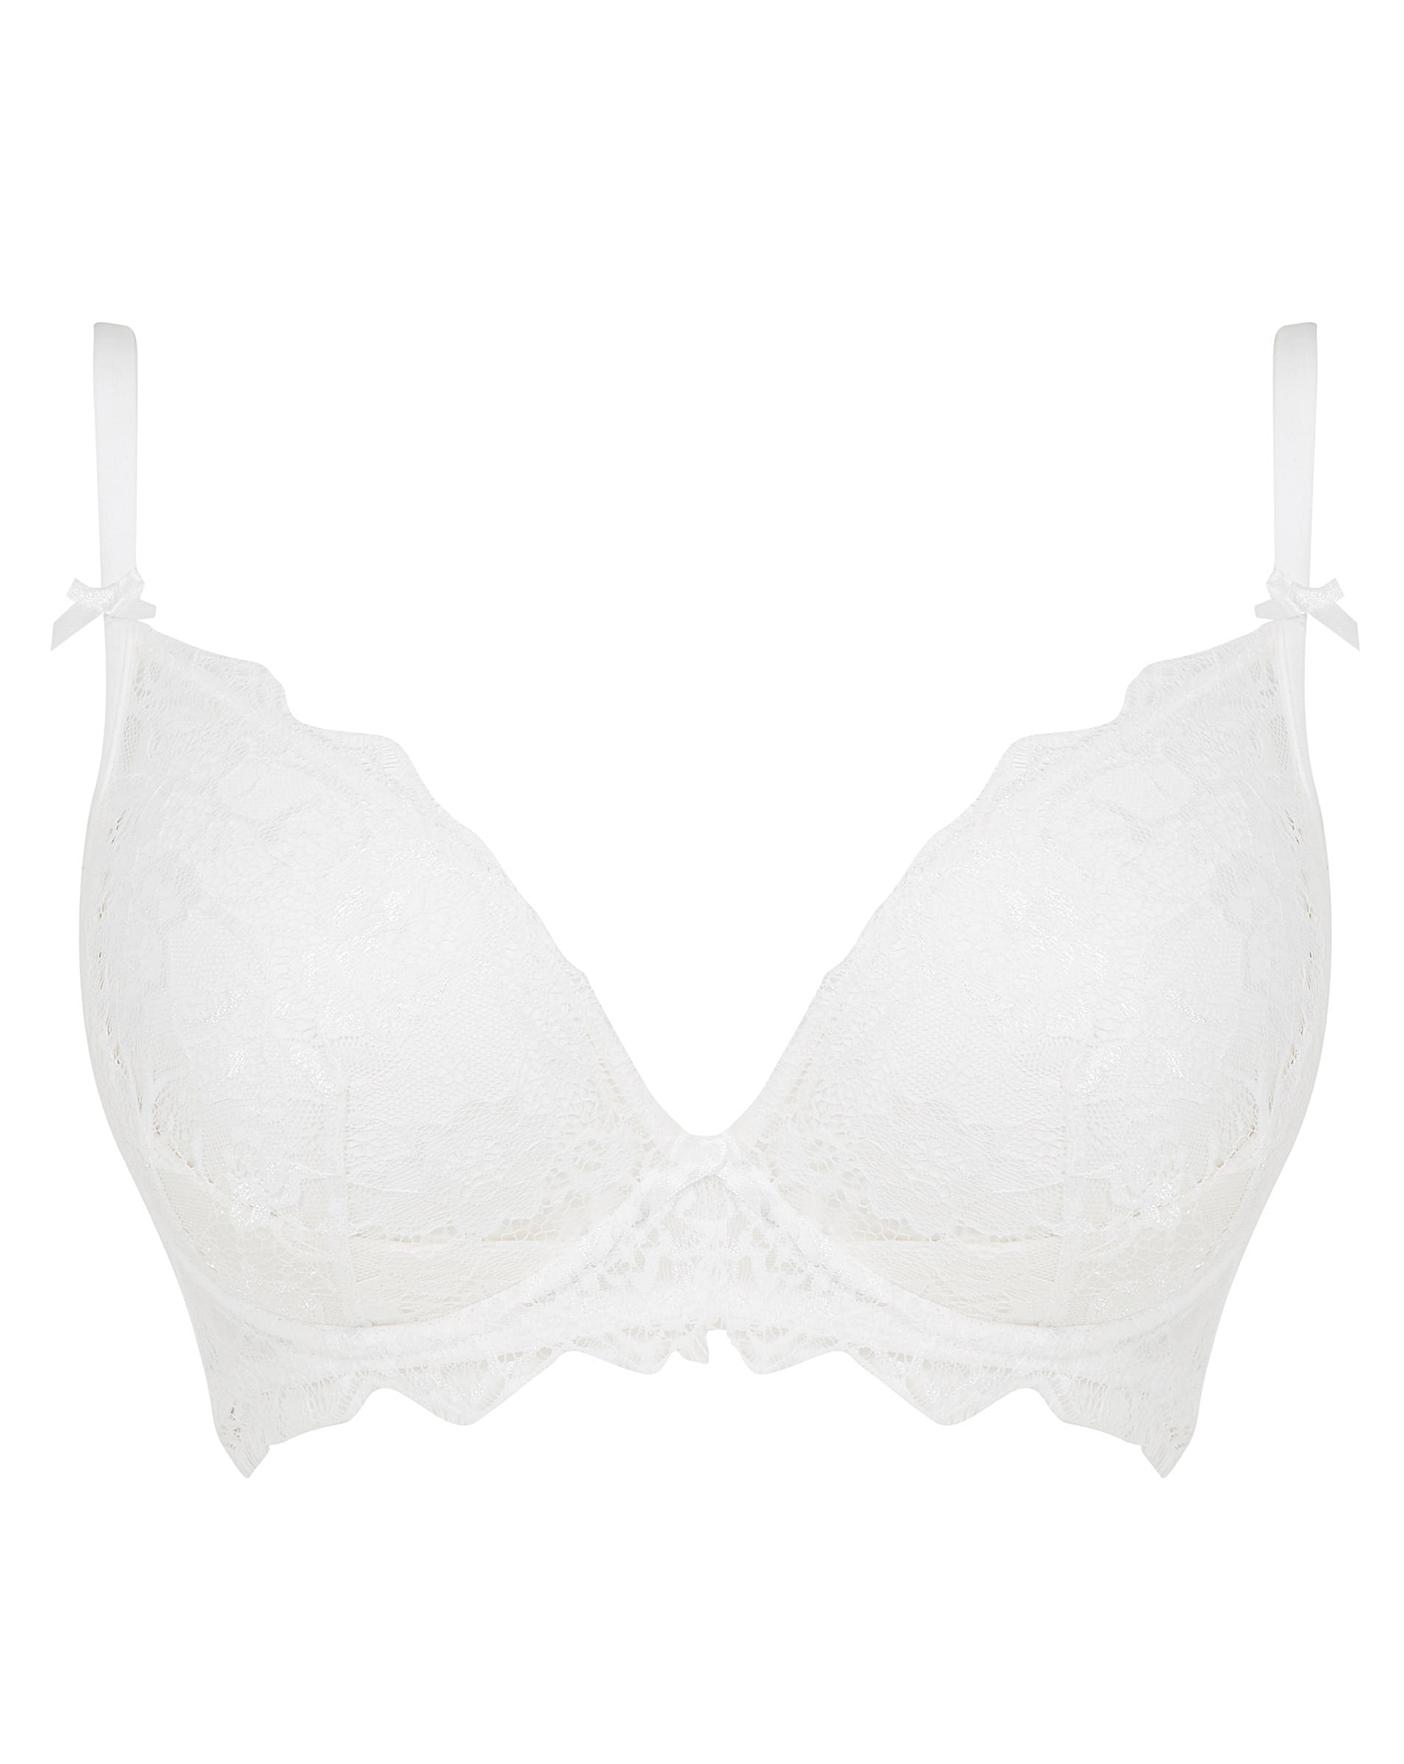 Figleaves Harper Plunge Bra 183167 Underwired Padded Lace Lingerie - White  